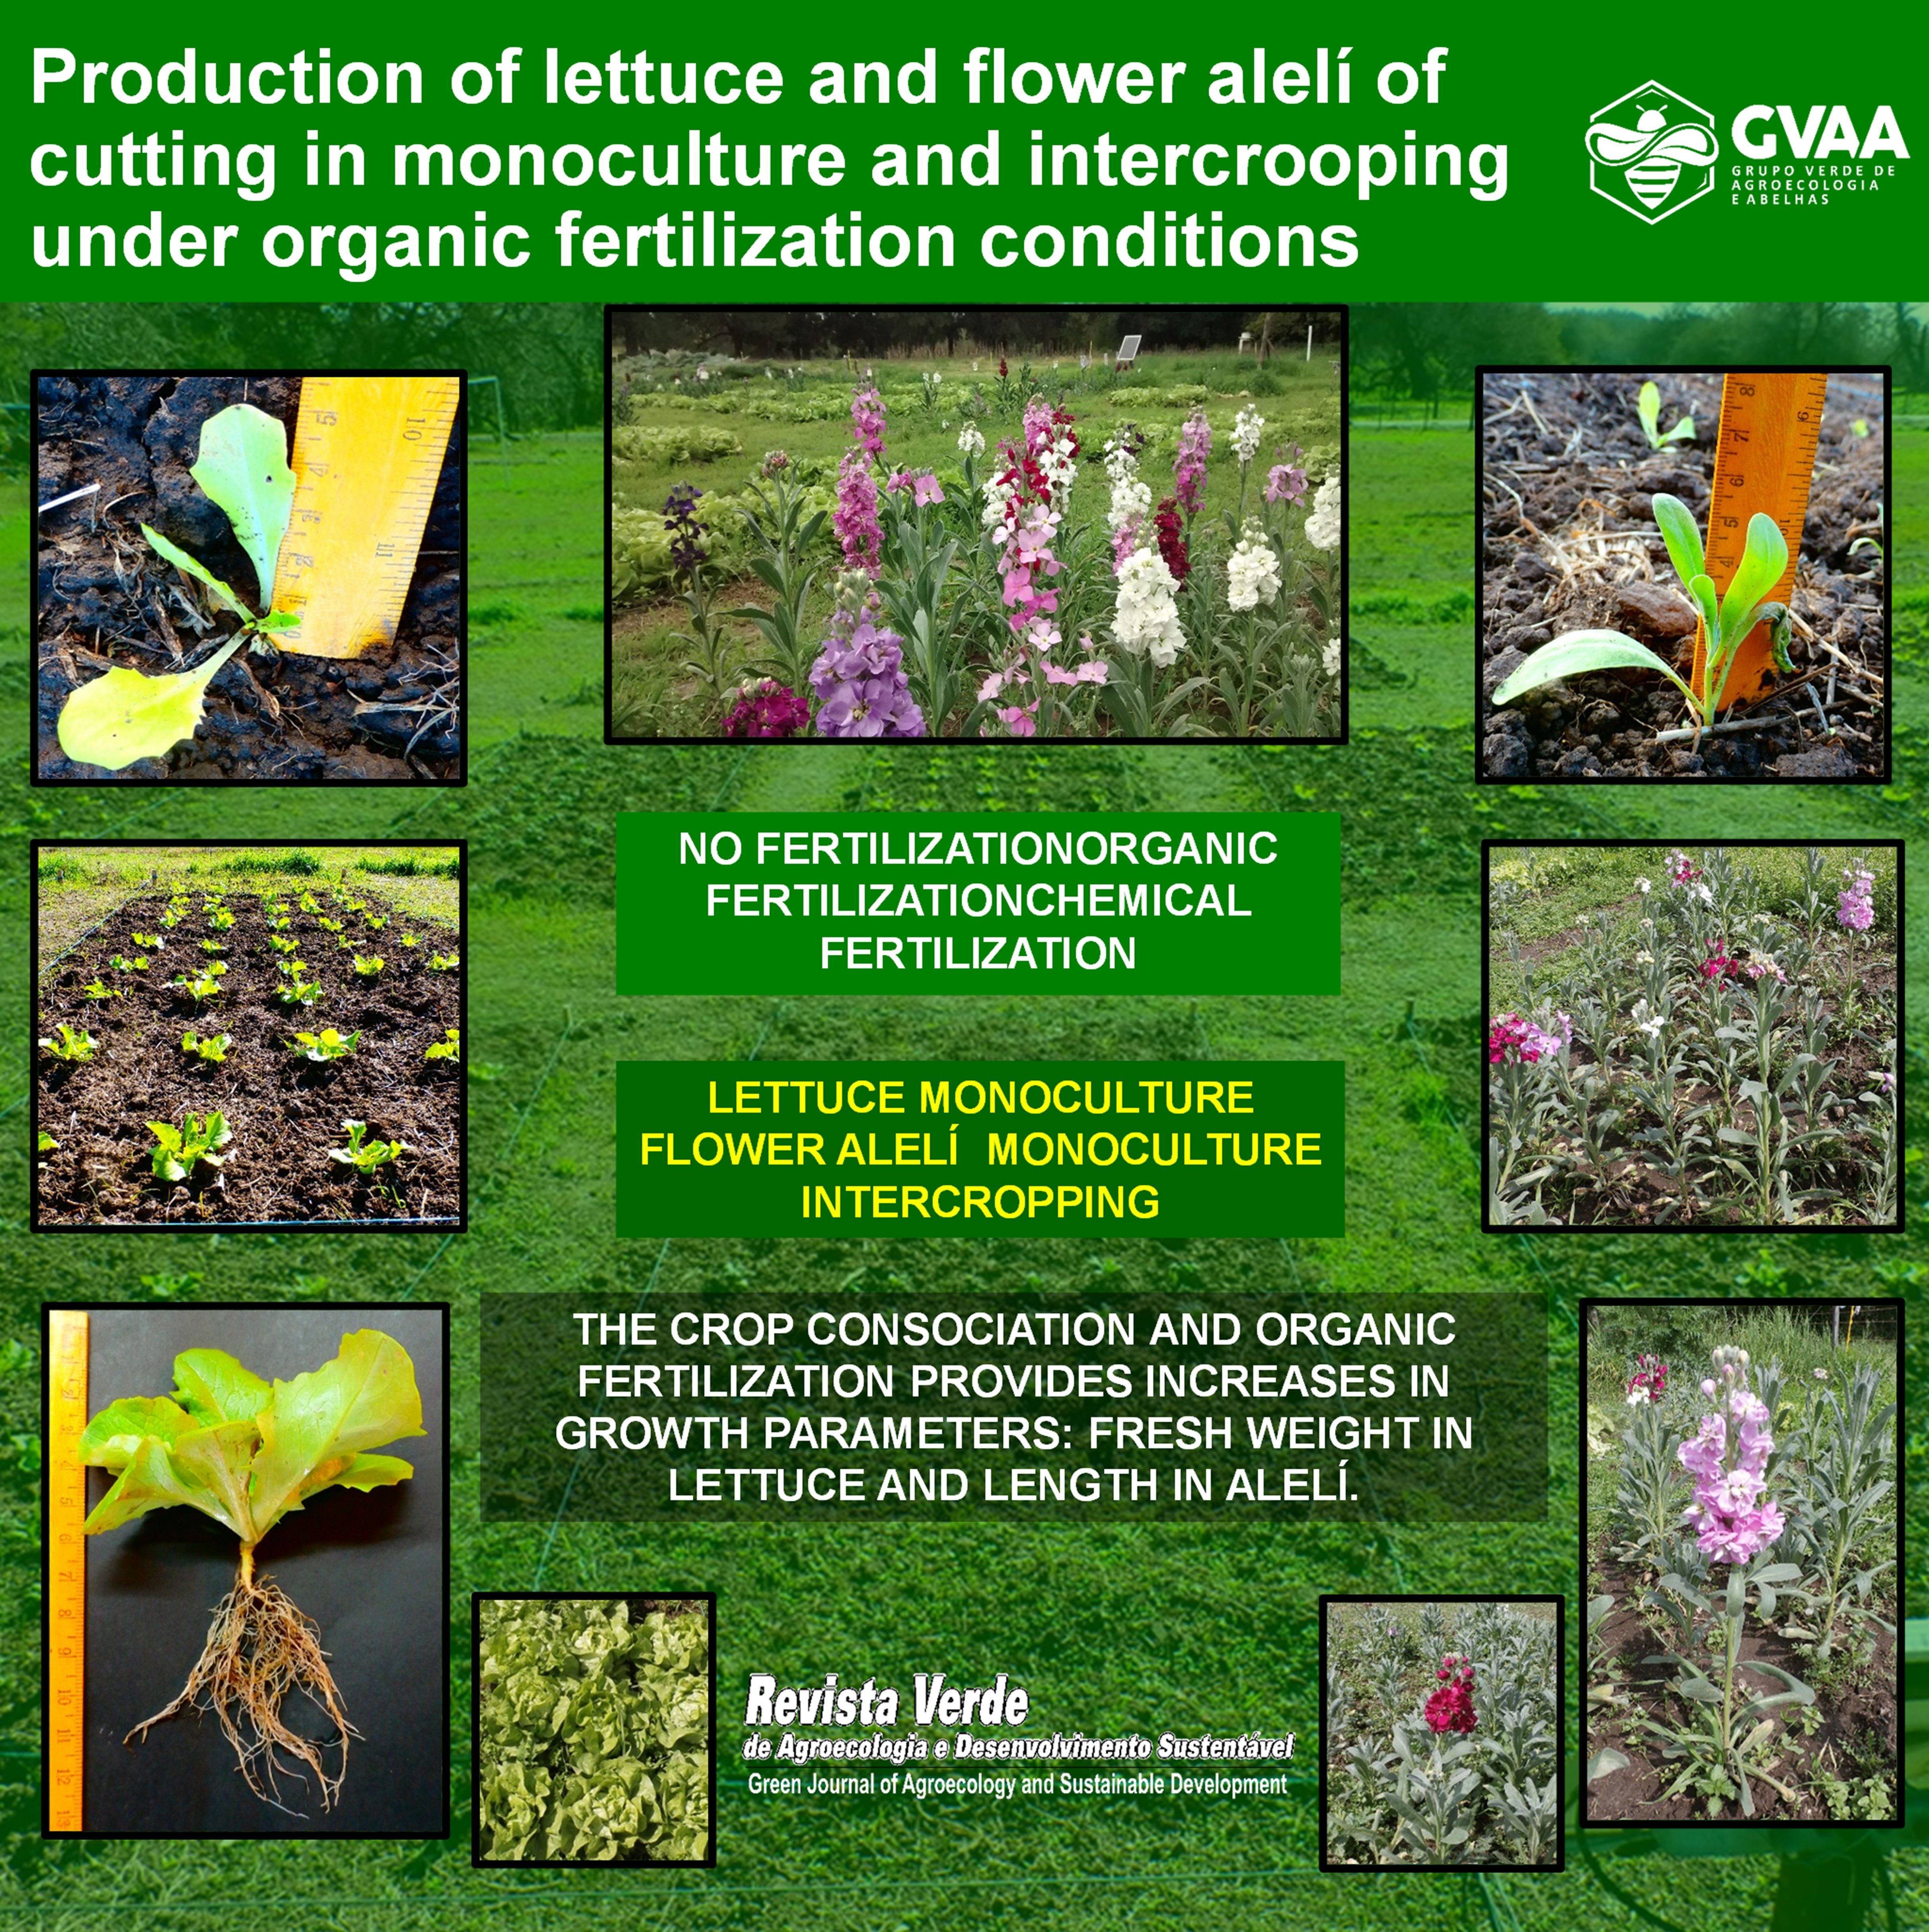 Production of lettuce and flower alelí of cutting in monoculture and intercrooping under organic fertilization conditions